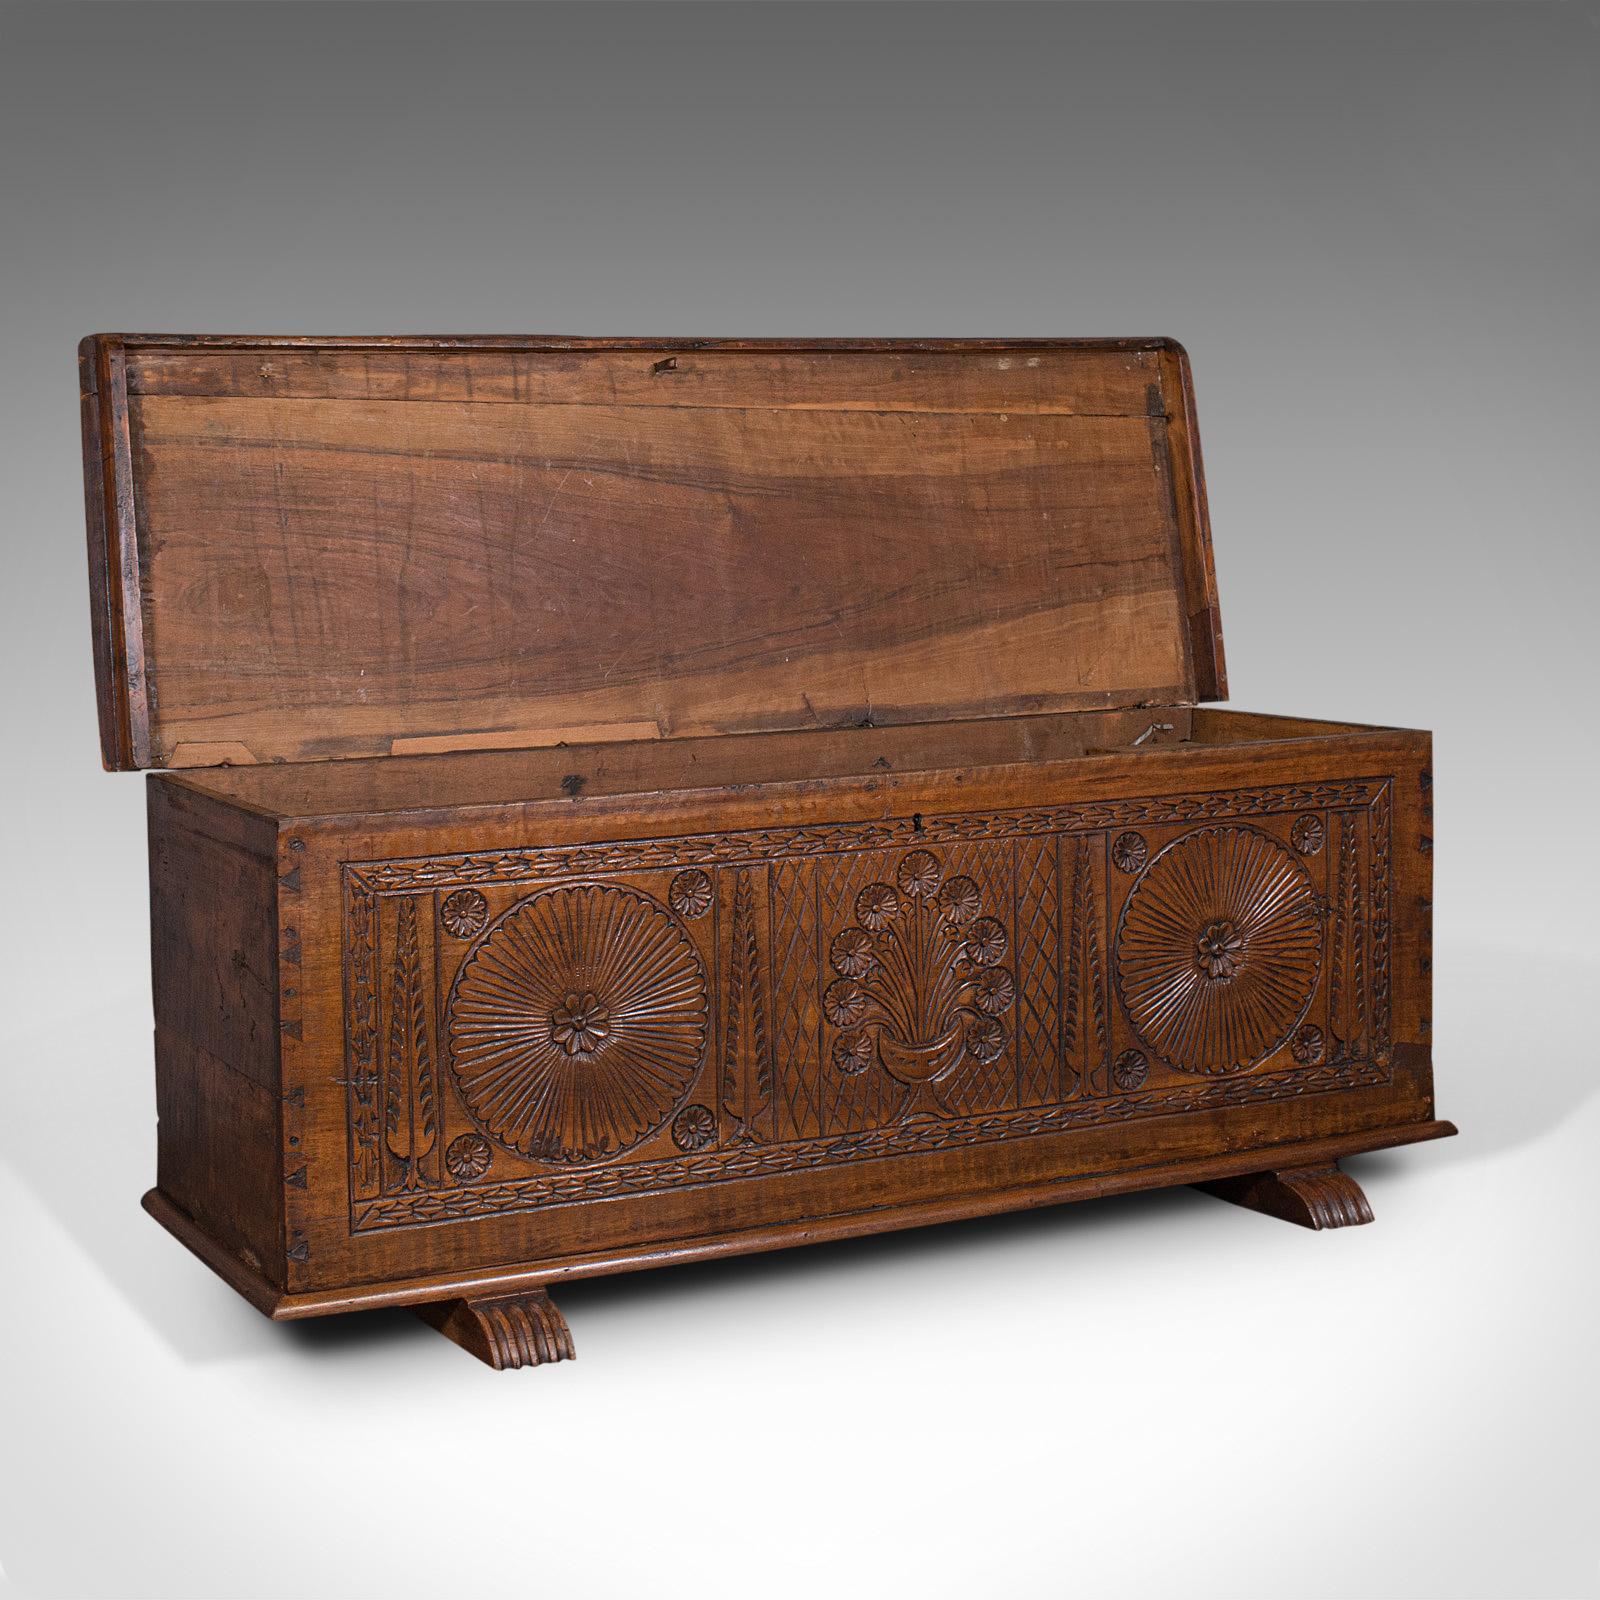 This is a large antique coffer. An Italian, walnut sword chest or linen trunk, dating to the mid 18th century, circa 1750.

Wonderfully carved chest with generous proportion and copious fascination
Displaying a desirable aged patina and good